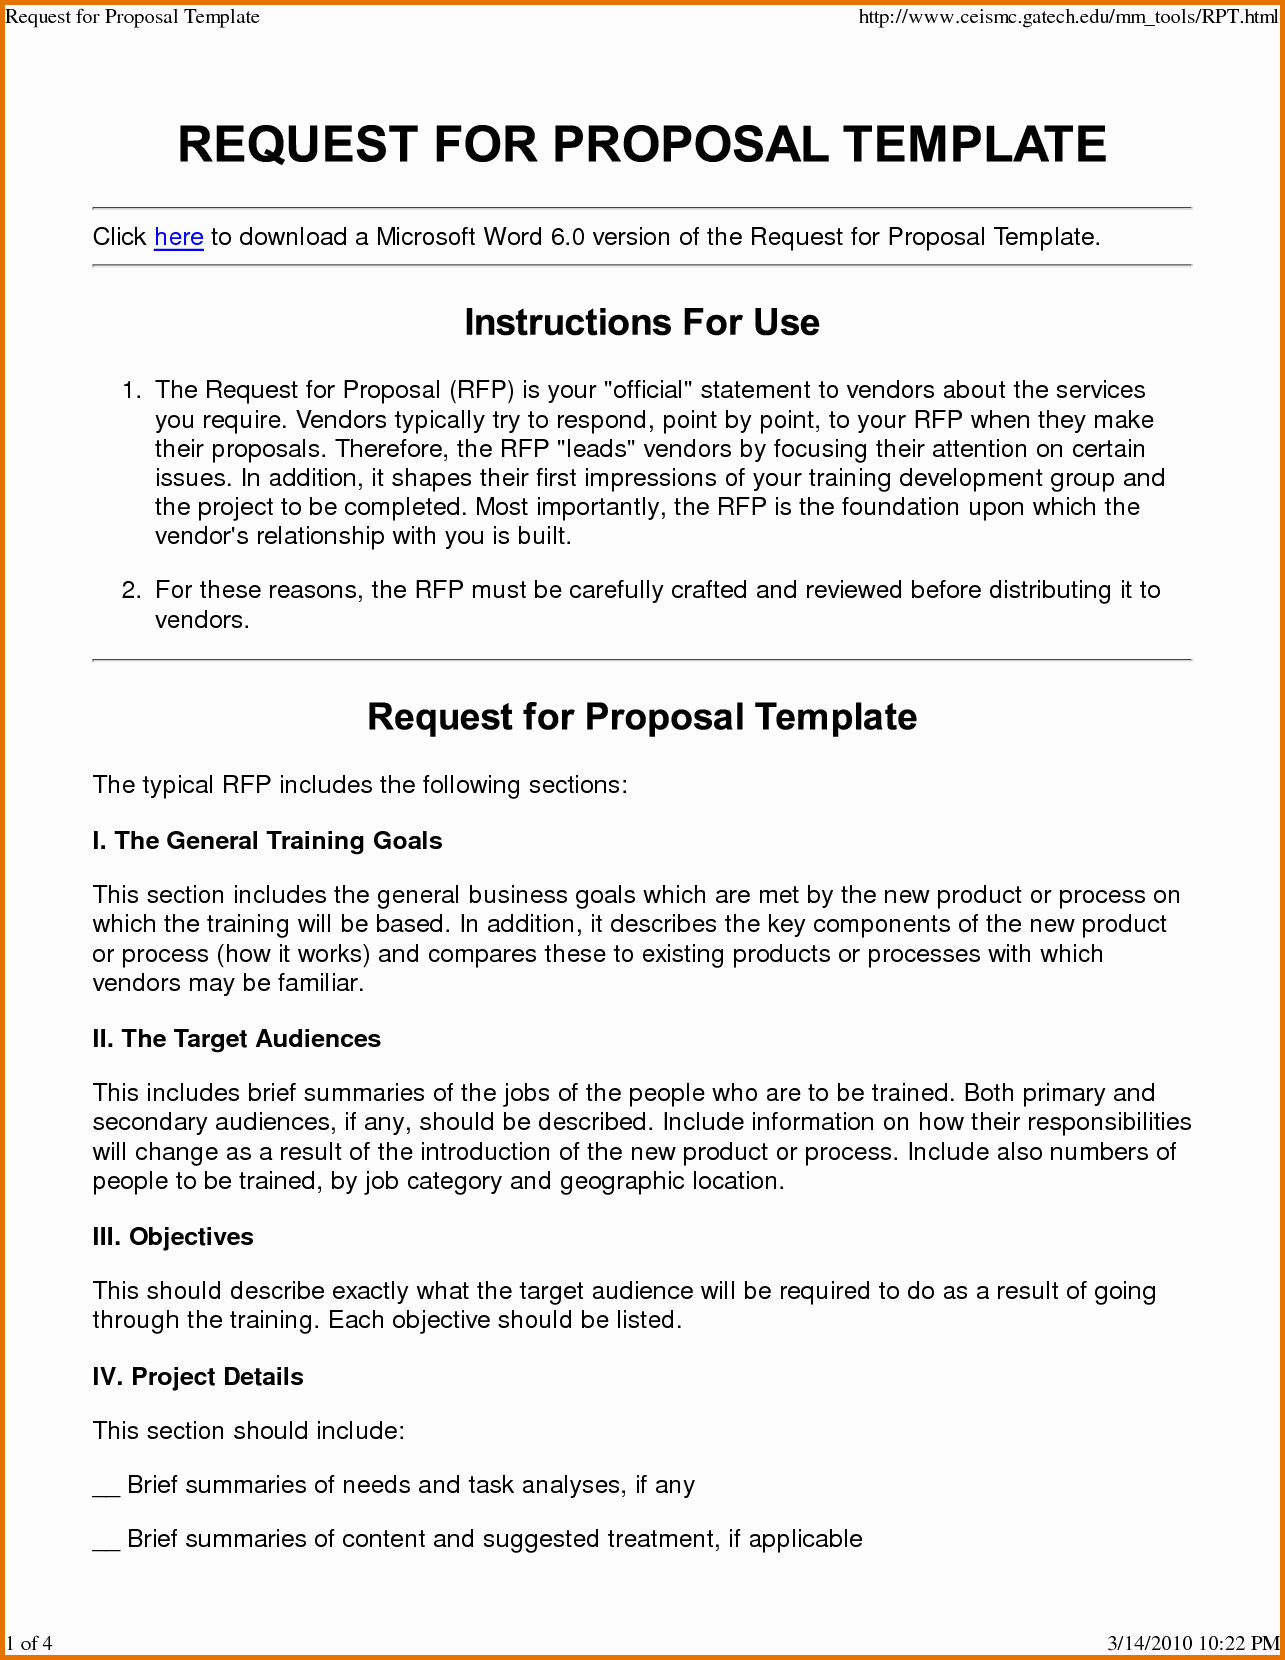 Simple Request for Proposal Template Beautiful Request for Proposal Template Wordreference Letters Words